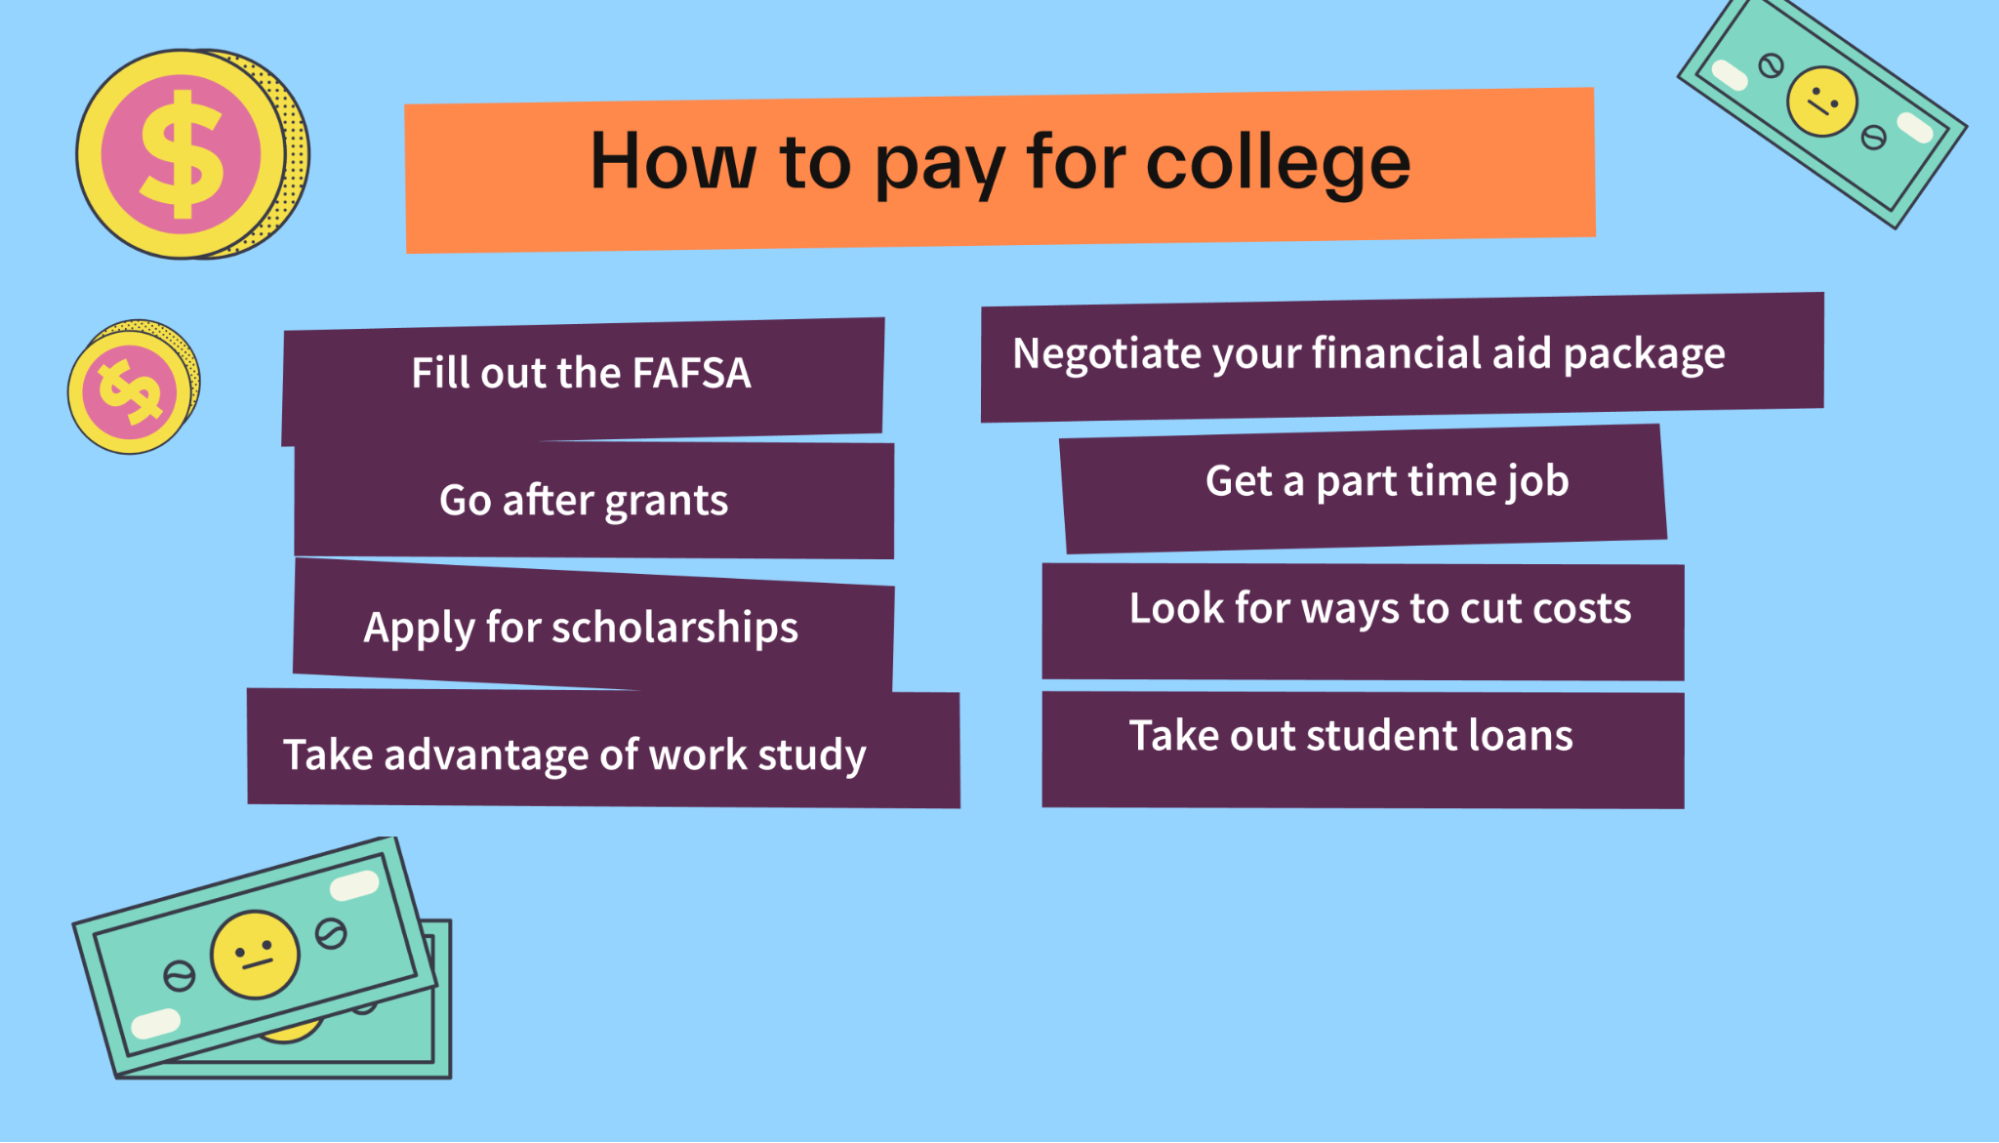 How to pay for college _ Image 2